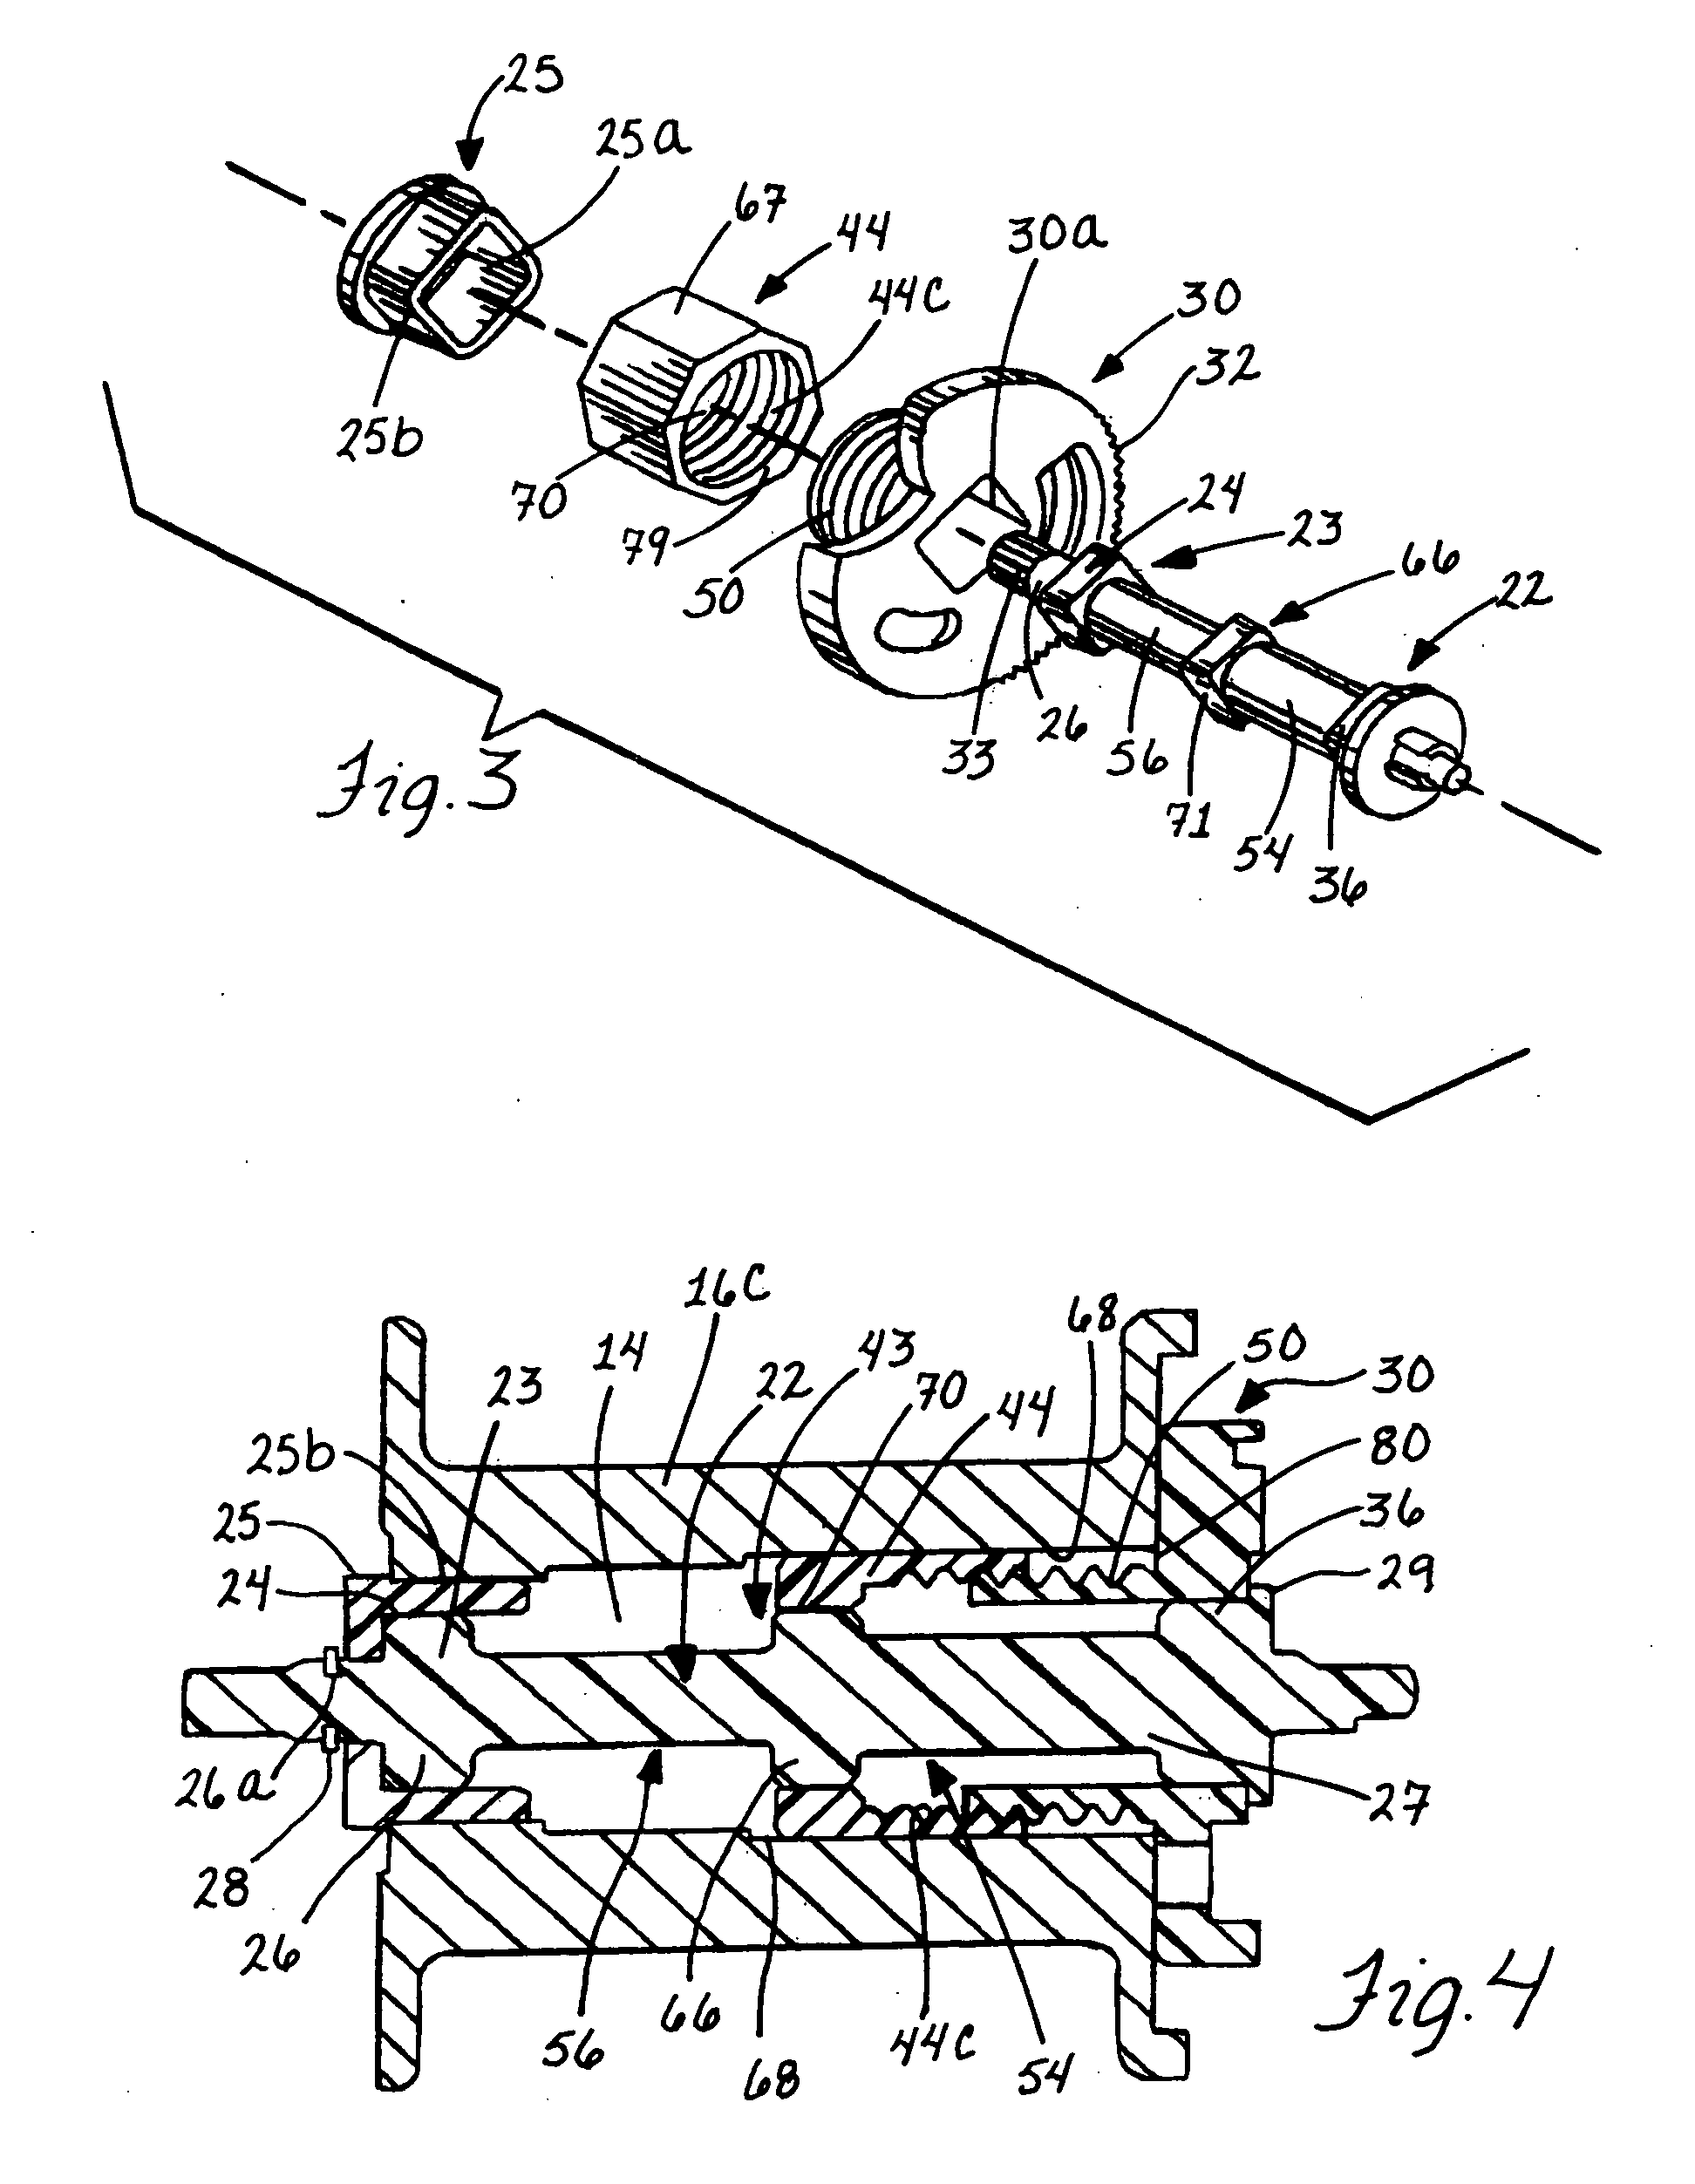 Retractor with multiple level load limiter